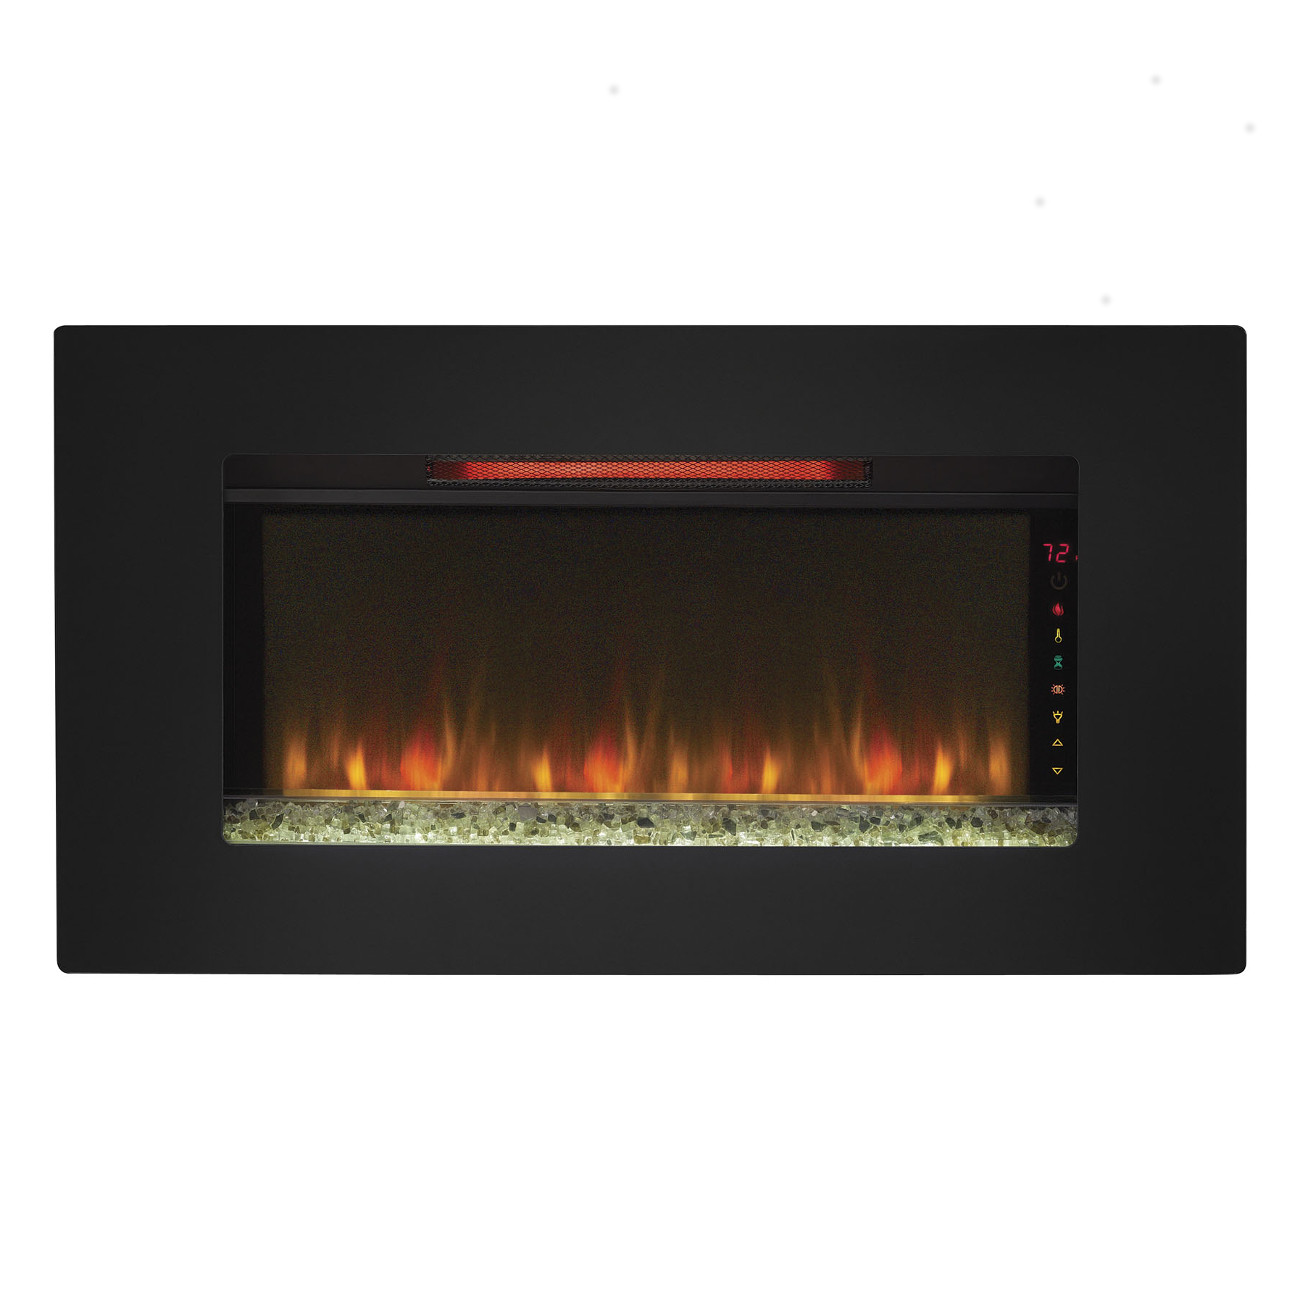 Classic Flame Electric Fireplace
 Classic Flame "Elysium" Infrared Electric Fireplace Wall